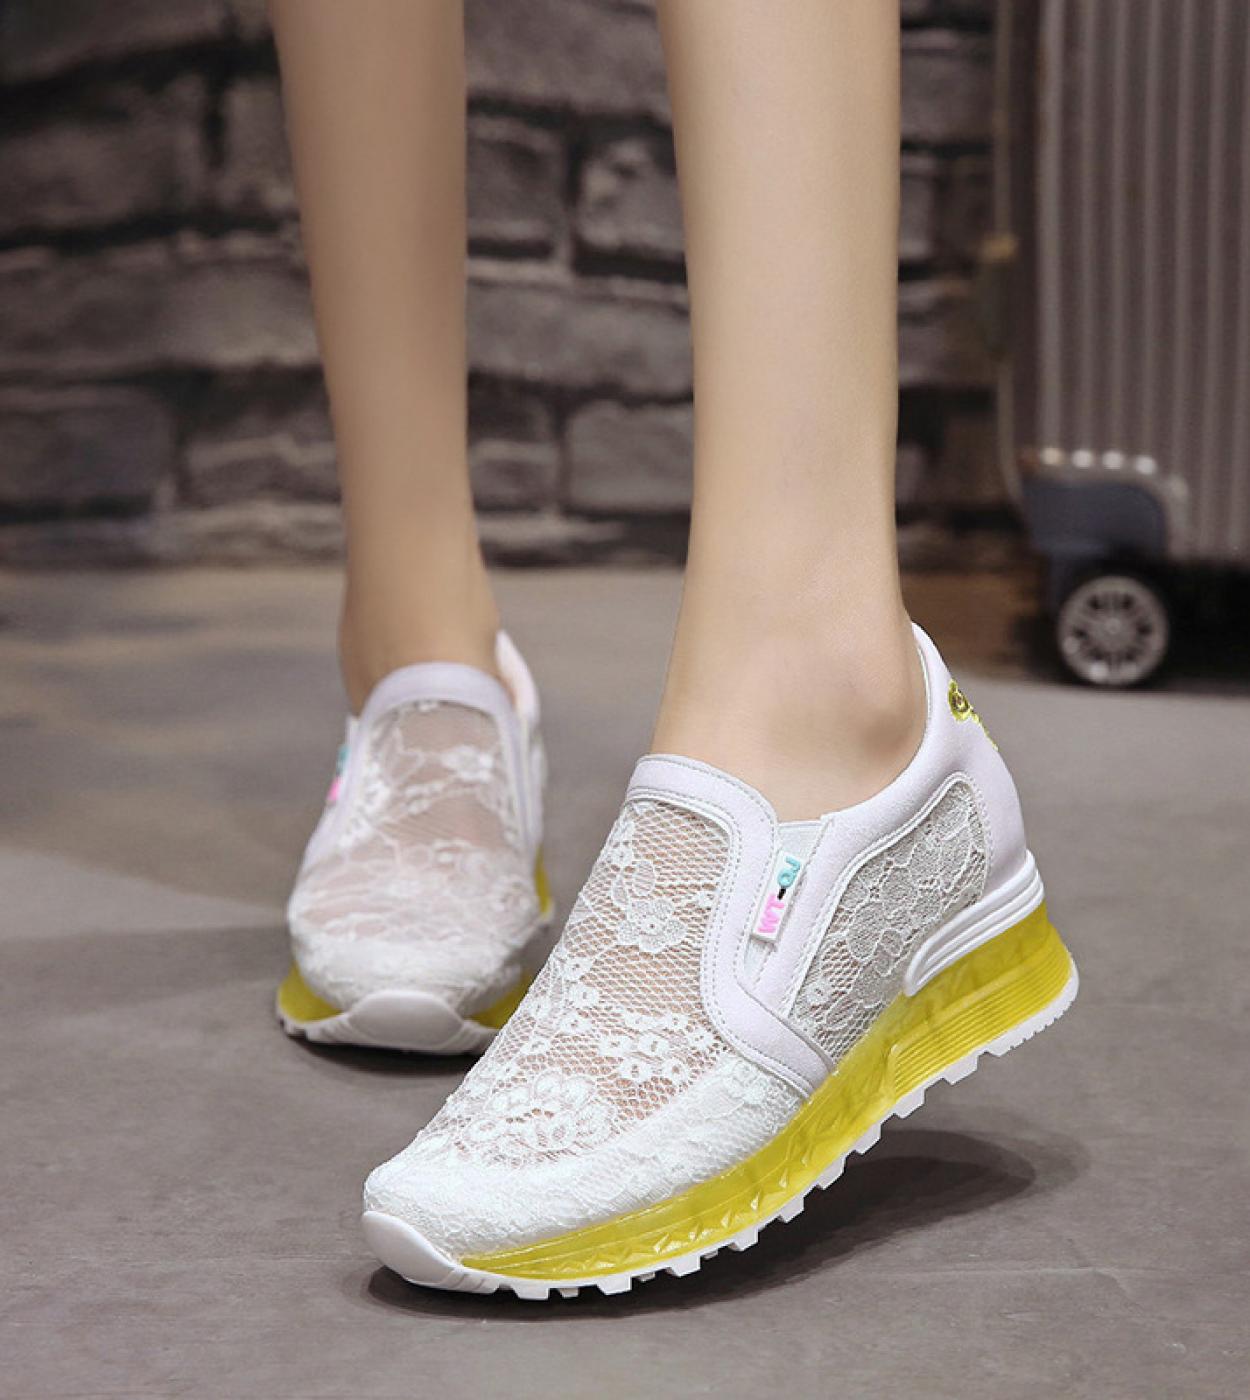 2022 Summer Shoes New Mesh Sneakers For Women Fashion Casual Wedge Platform Casual Shoes Female Slip On Breathable Sport